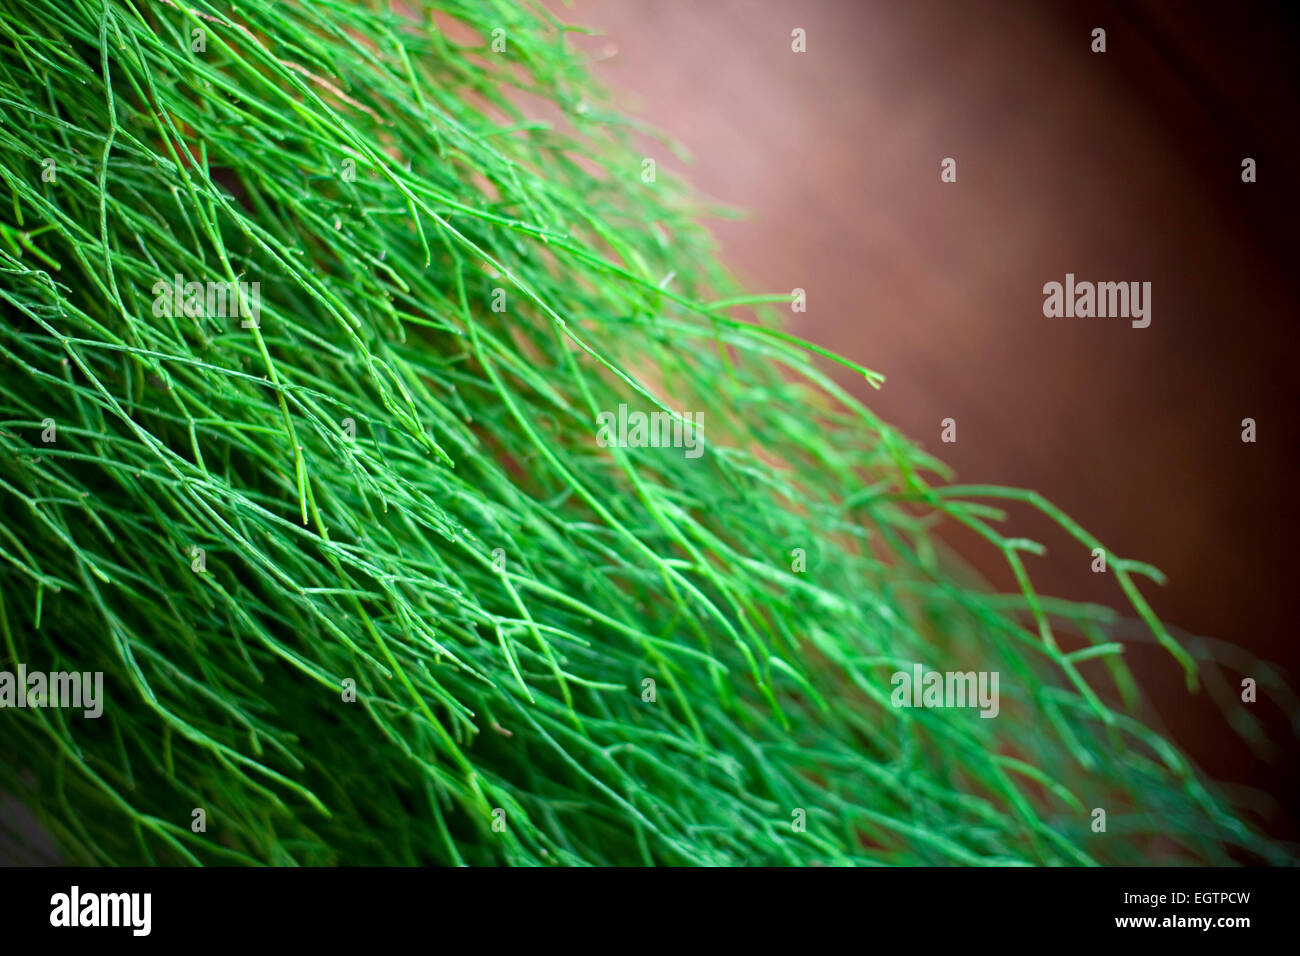 Details of a green plant for a vegetal background Stock Photo